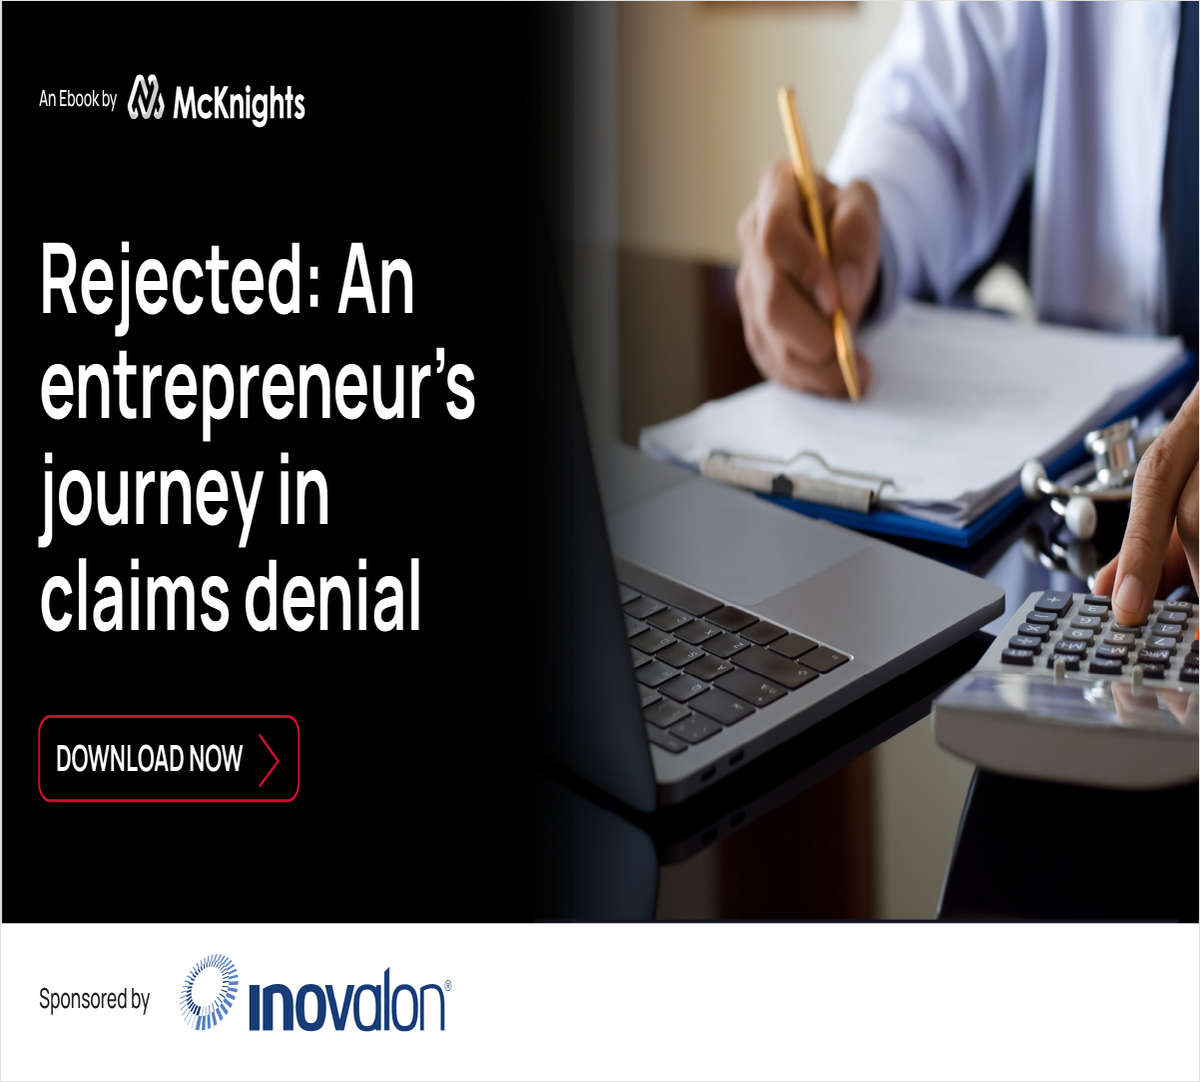 REJECTED: AN ENTREPRENEUR'S JOURNEY IN CLAIMS DENIAL